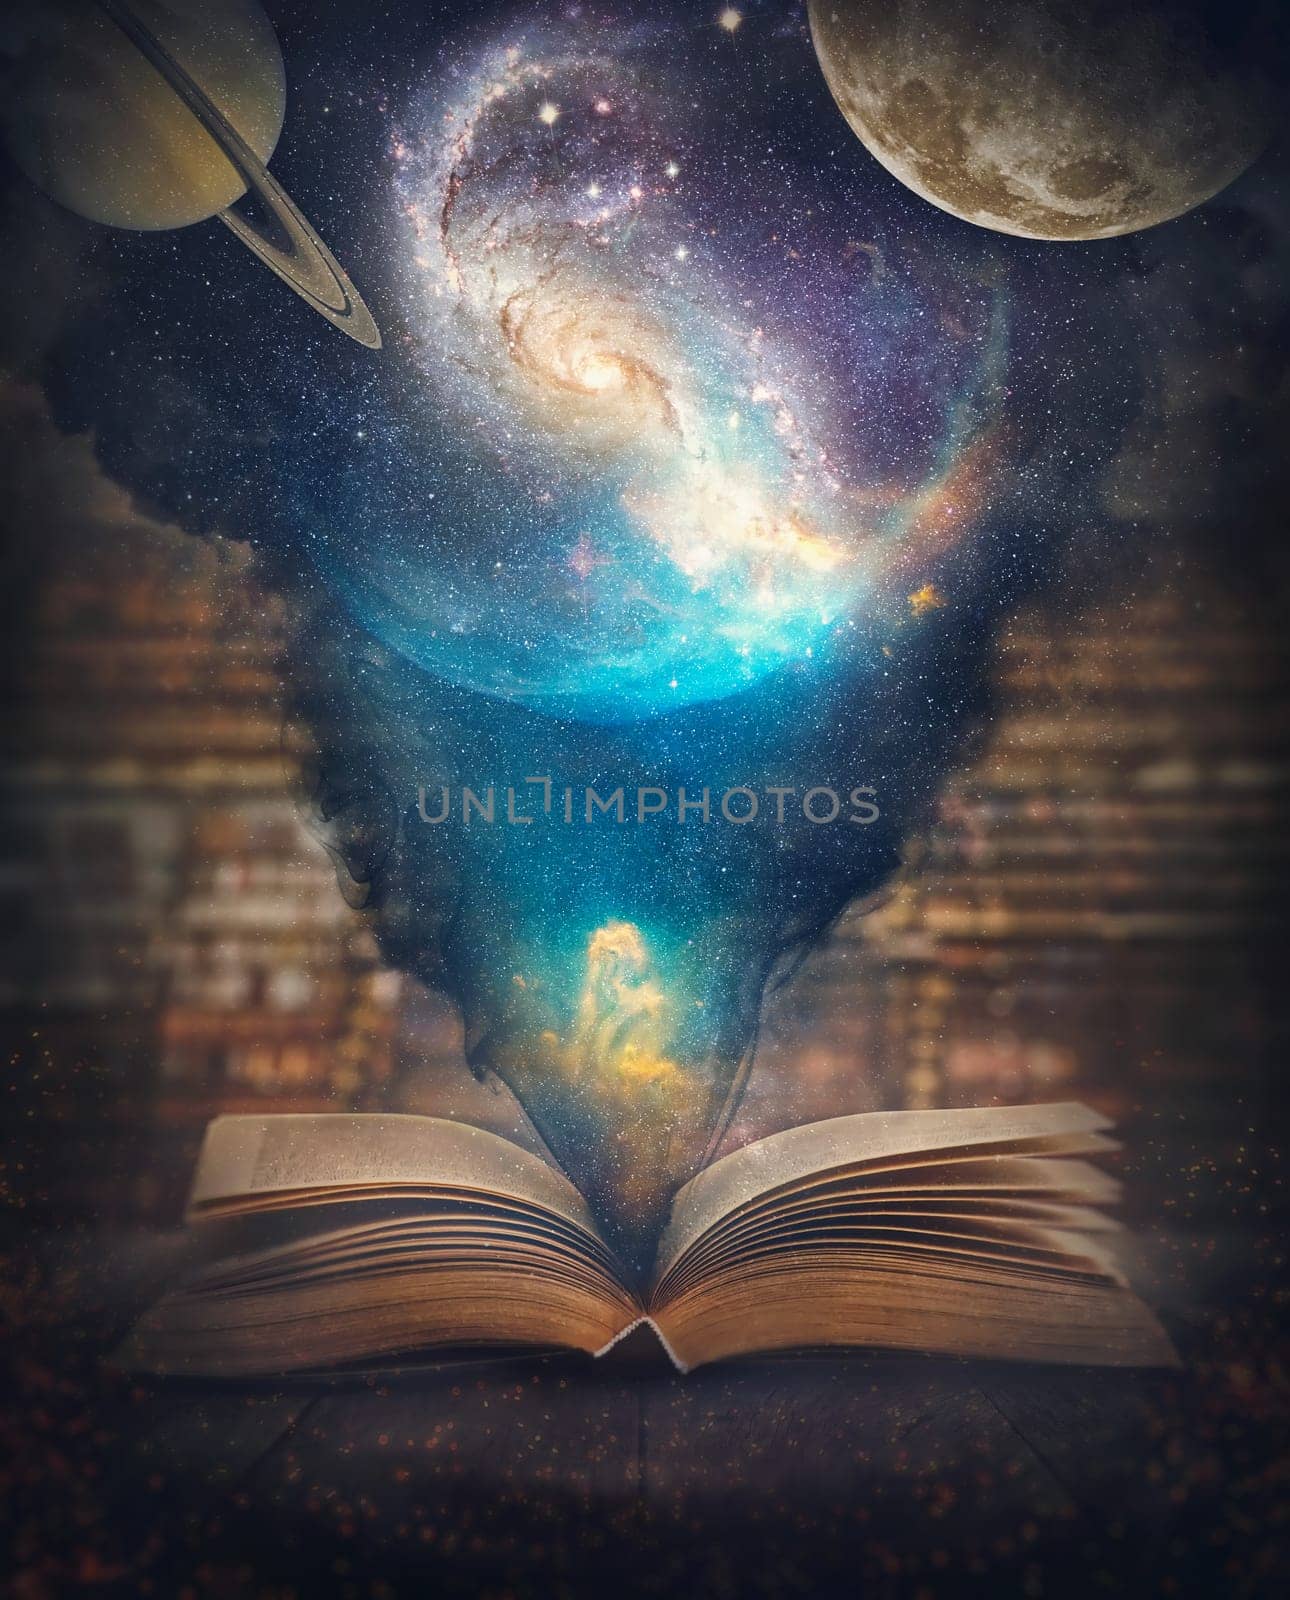 The world and universe inside a book surreal background. Educational and science concept with a magical open textbook casting a cosmic scene with galaxies, stars and planets. Inspirational storybook by psychoshadow